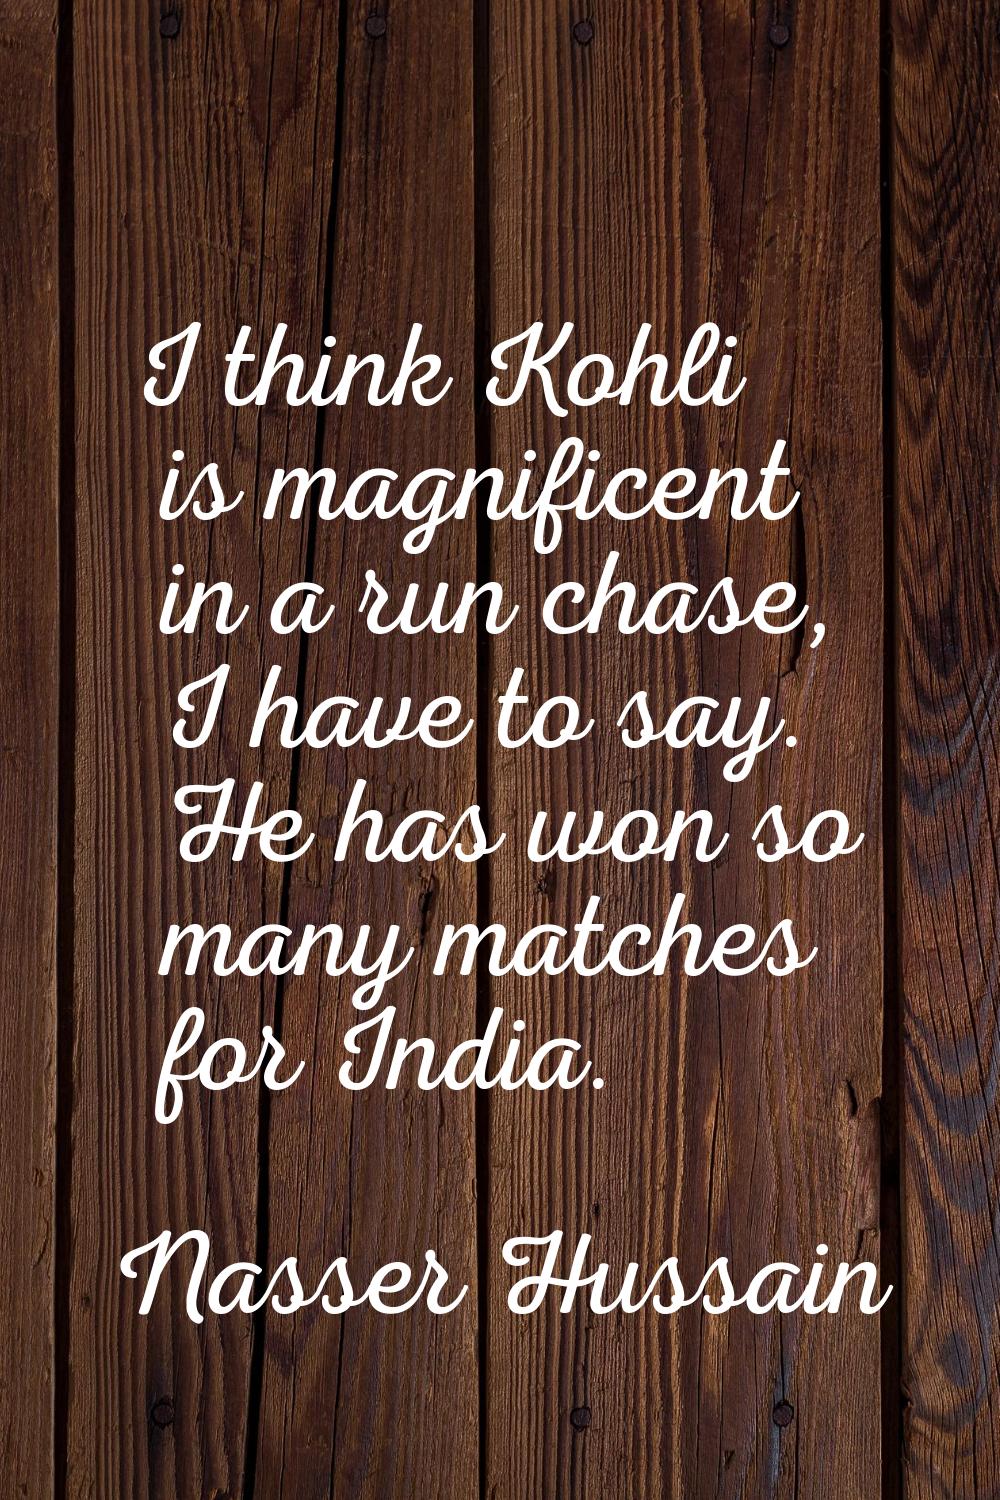 I think Kohli is magnificent in a run chase, I have to say. He has won so many matches for India.